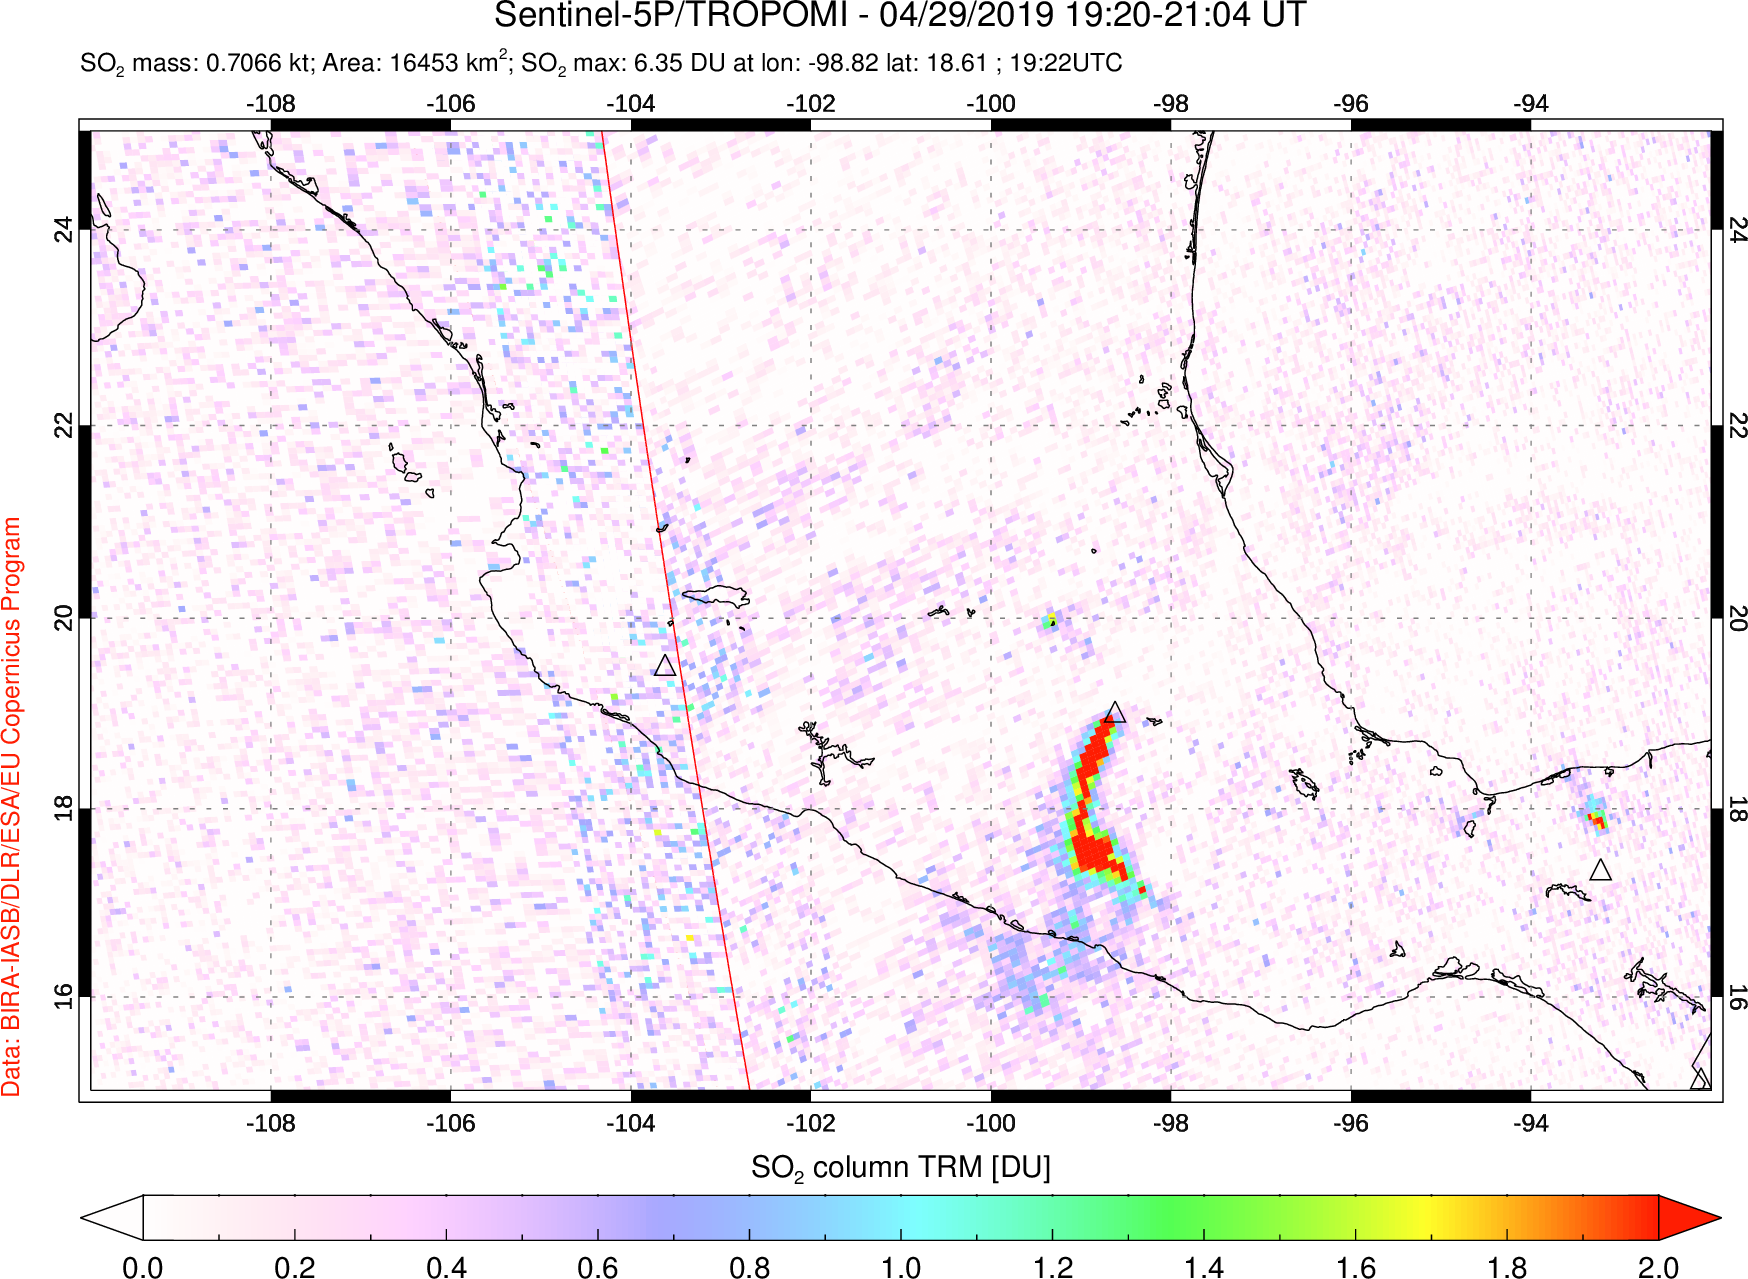 A sulfur dioxide image over Mexico on Apr 29, 2019.